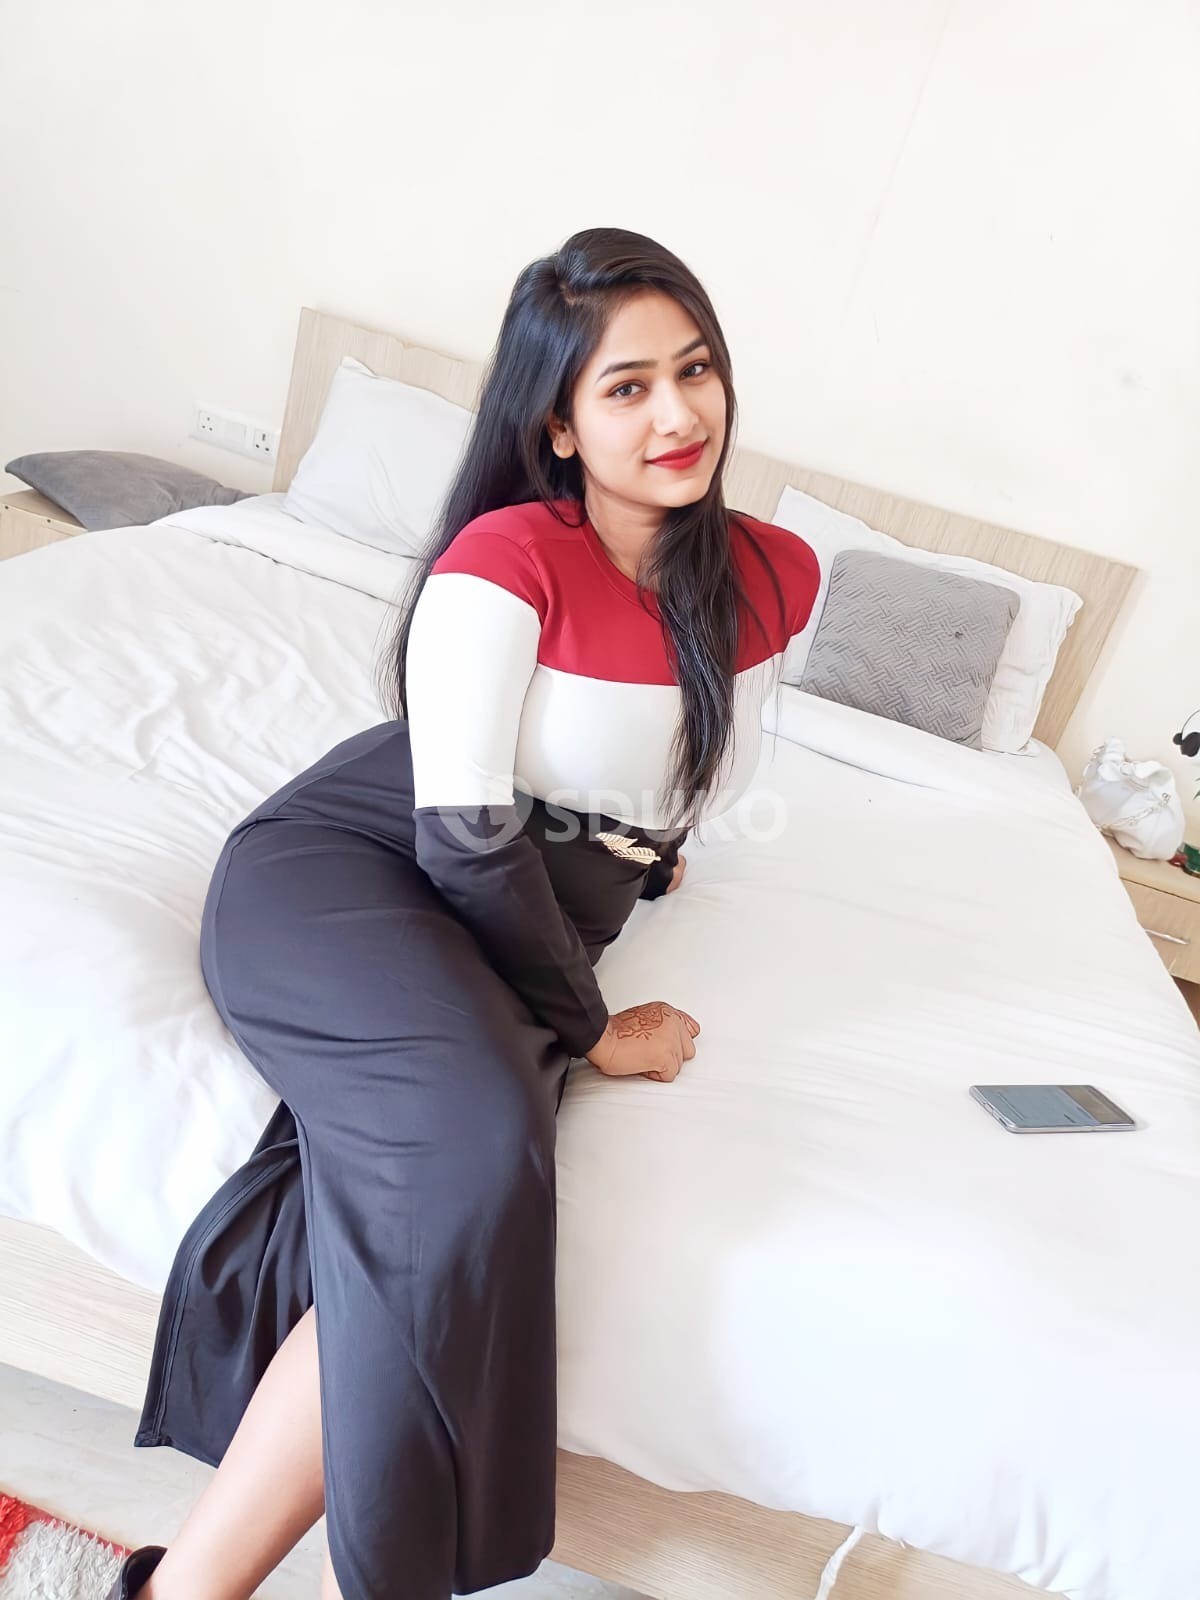 Ahmedabad best call girl service 24 hours available